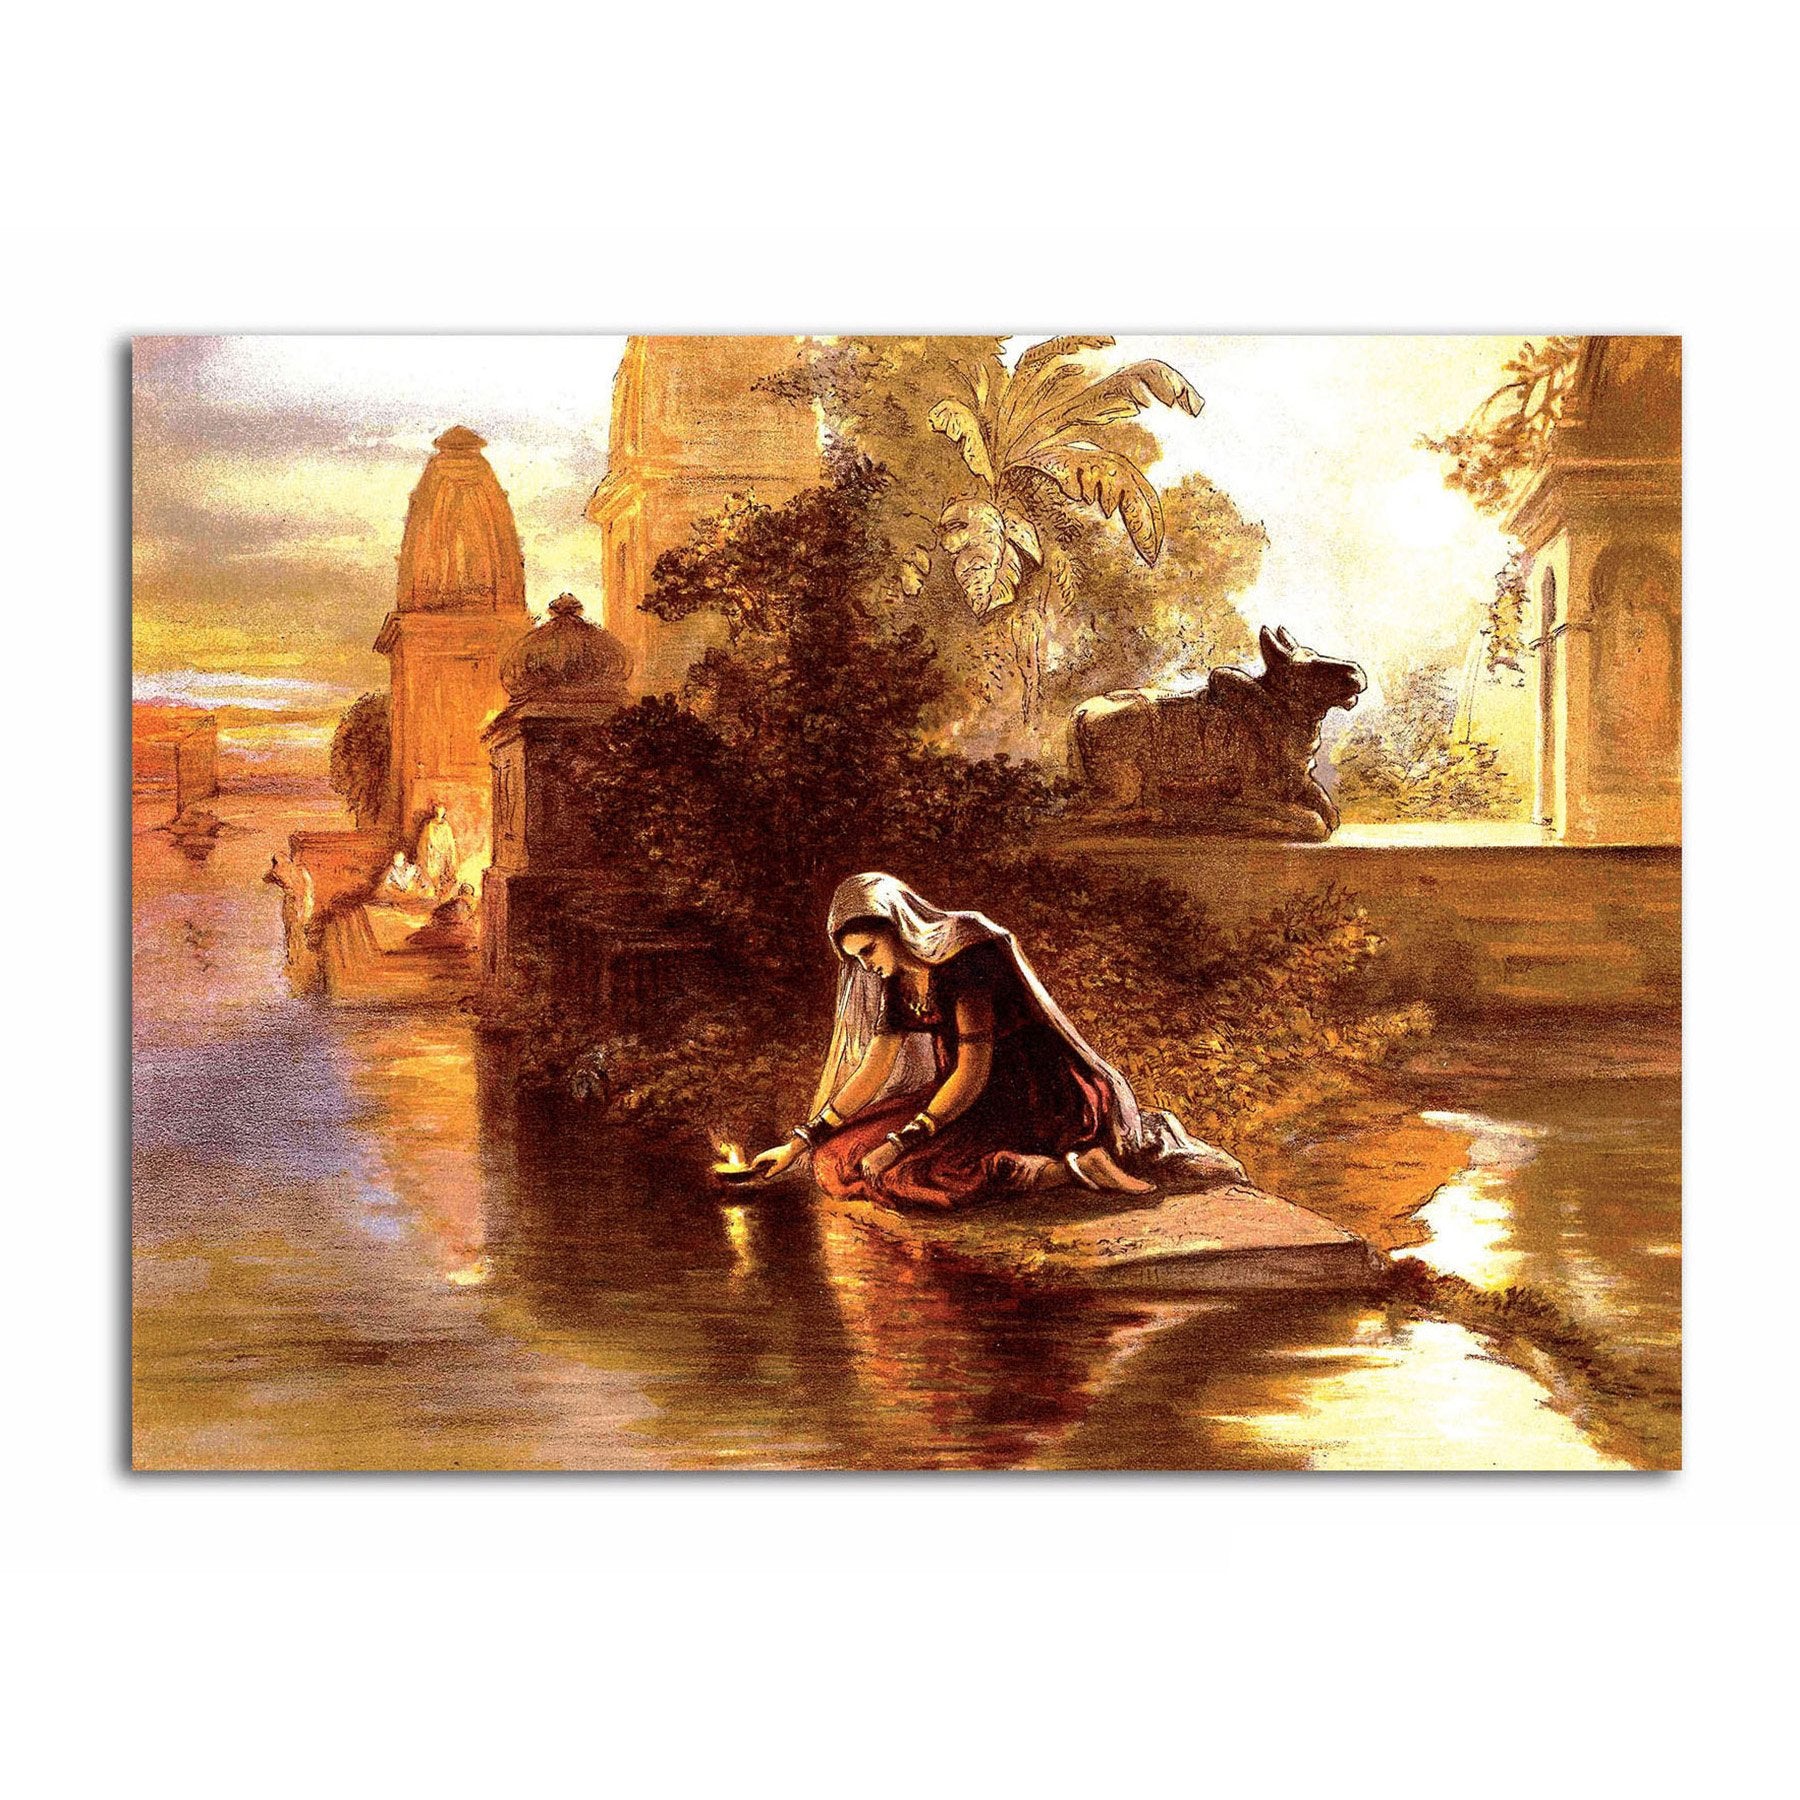 A Girl praying on a River Side